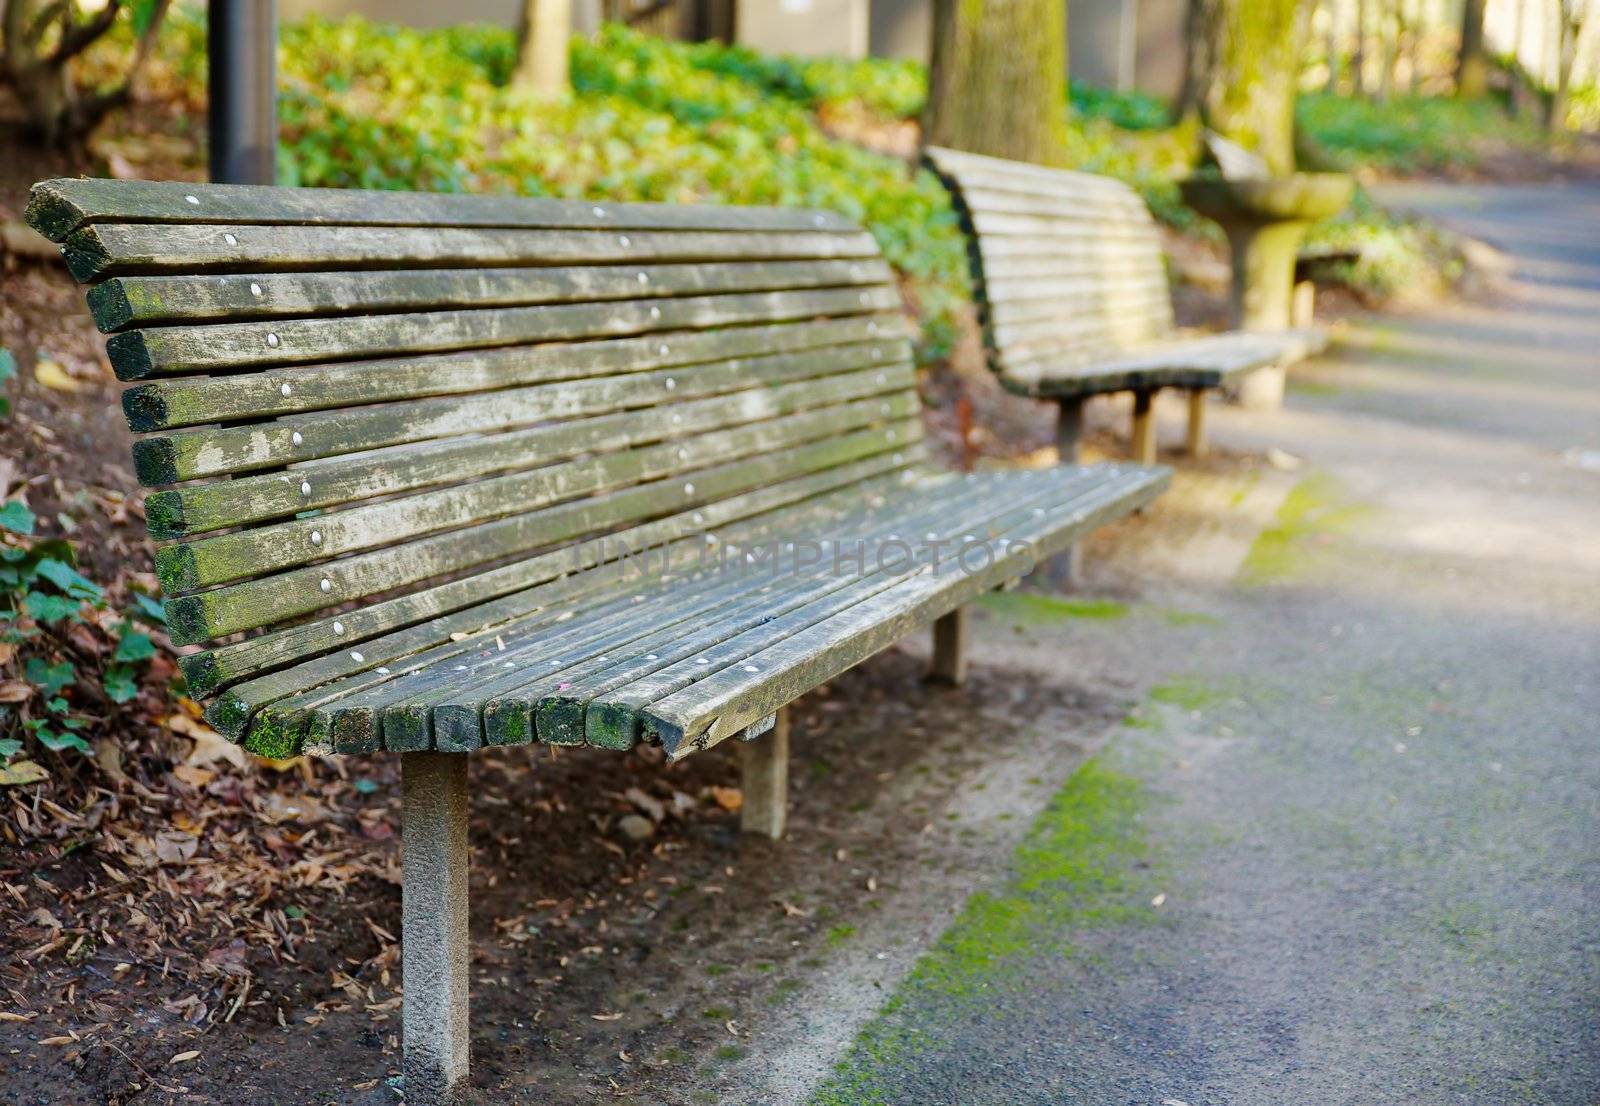 Park Bench perspective by bobkeenan